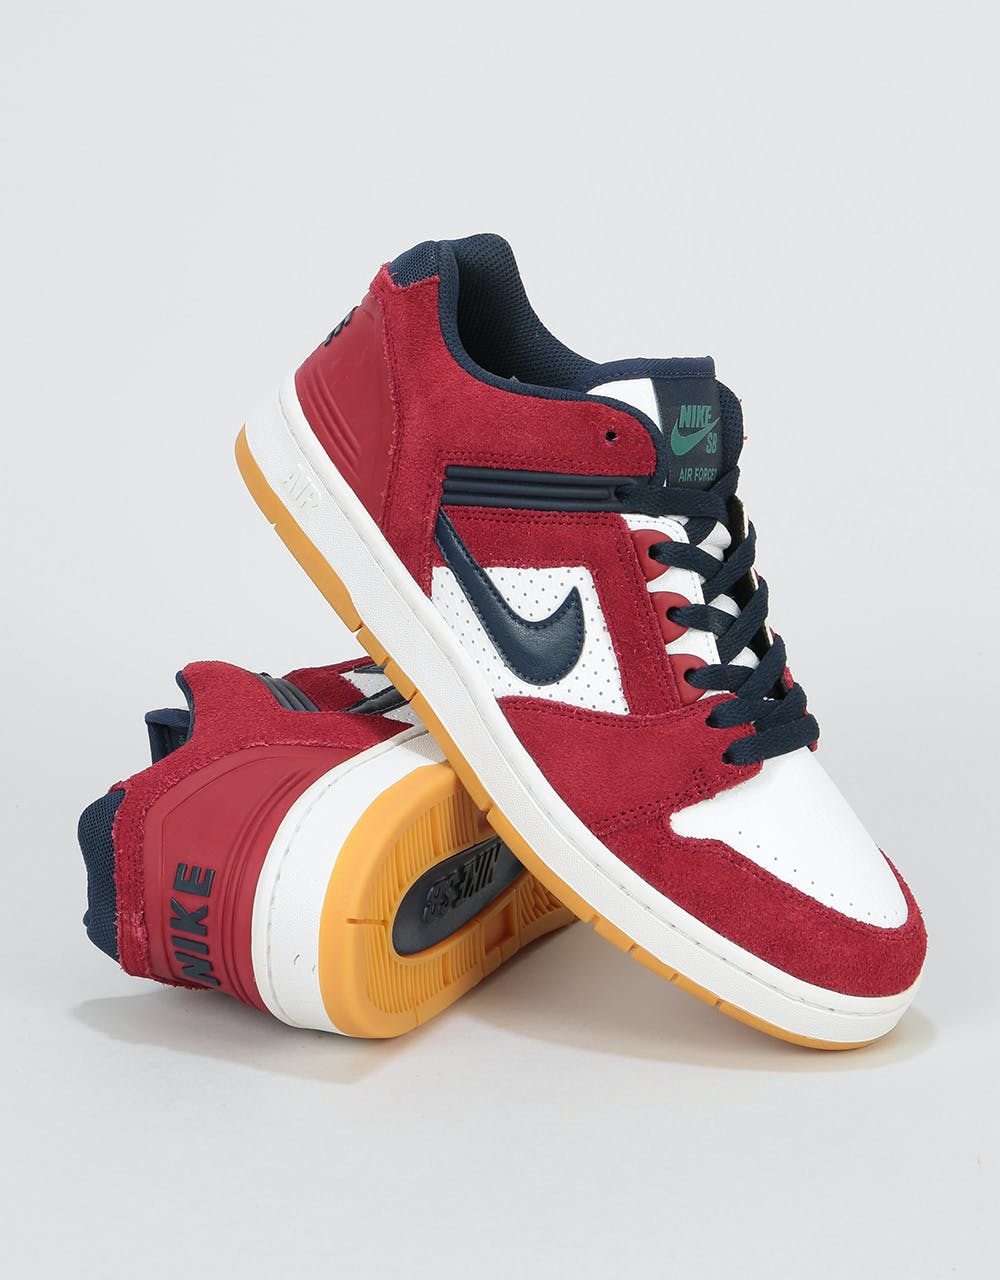 Nike SB Air Force II Low Skate Shoes - Team Red/Obsidian-White-White